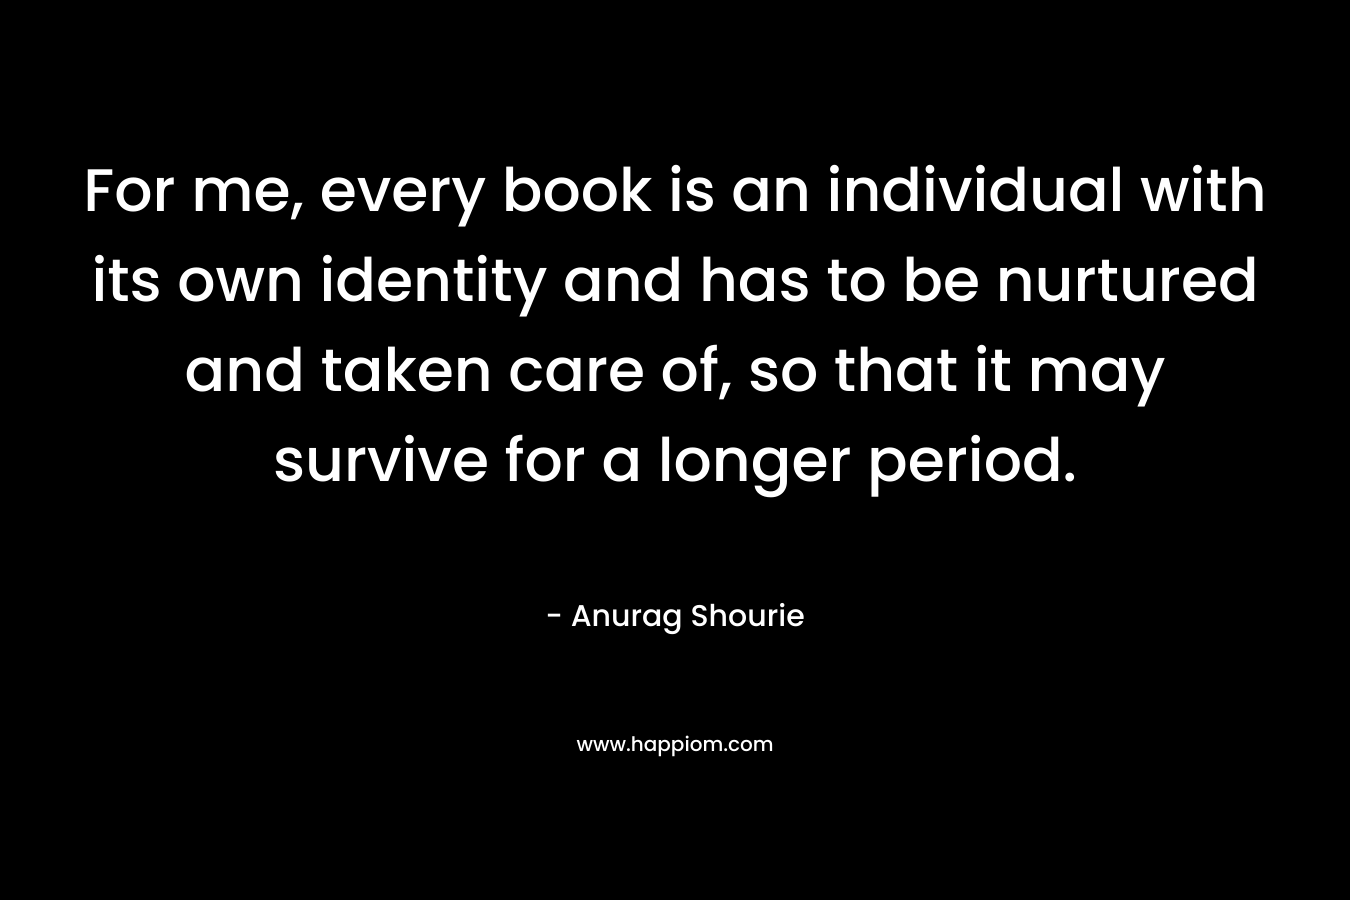 For me, every book is an individual with its own identity and has to be nurtured and taken care of, so that it may survive for a longer period.